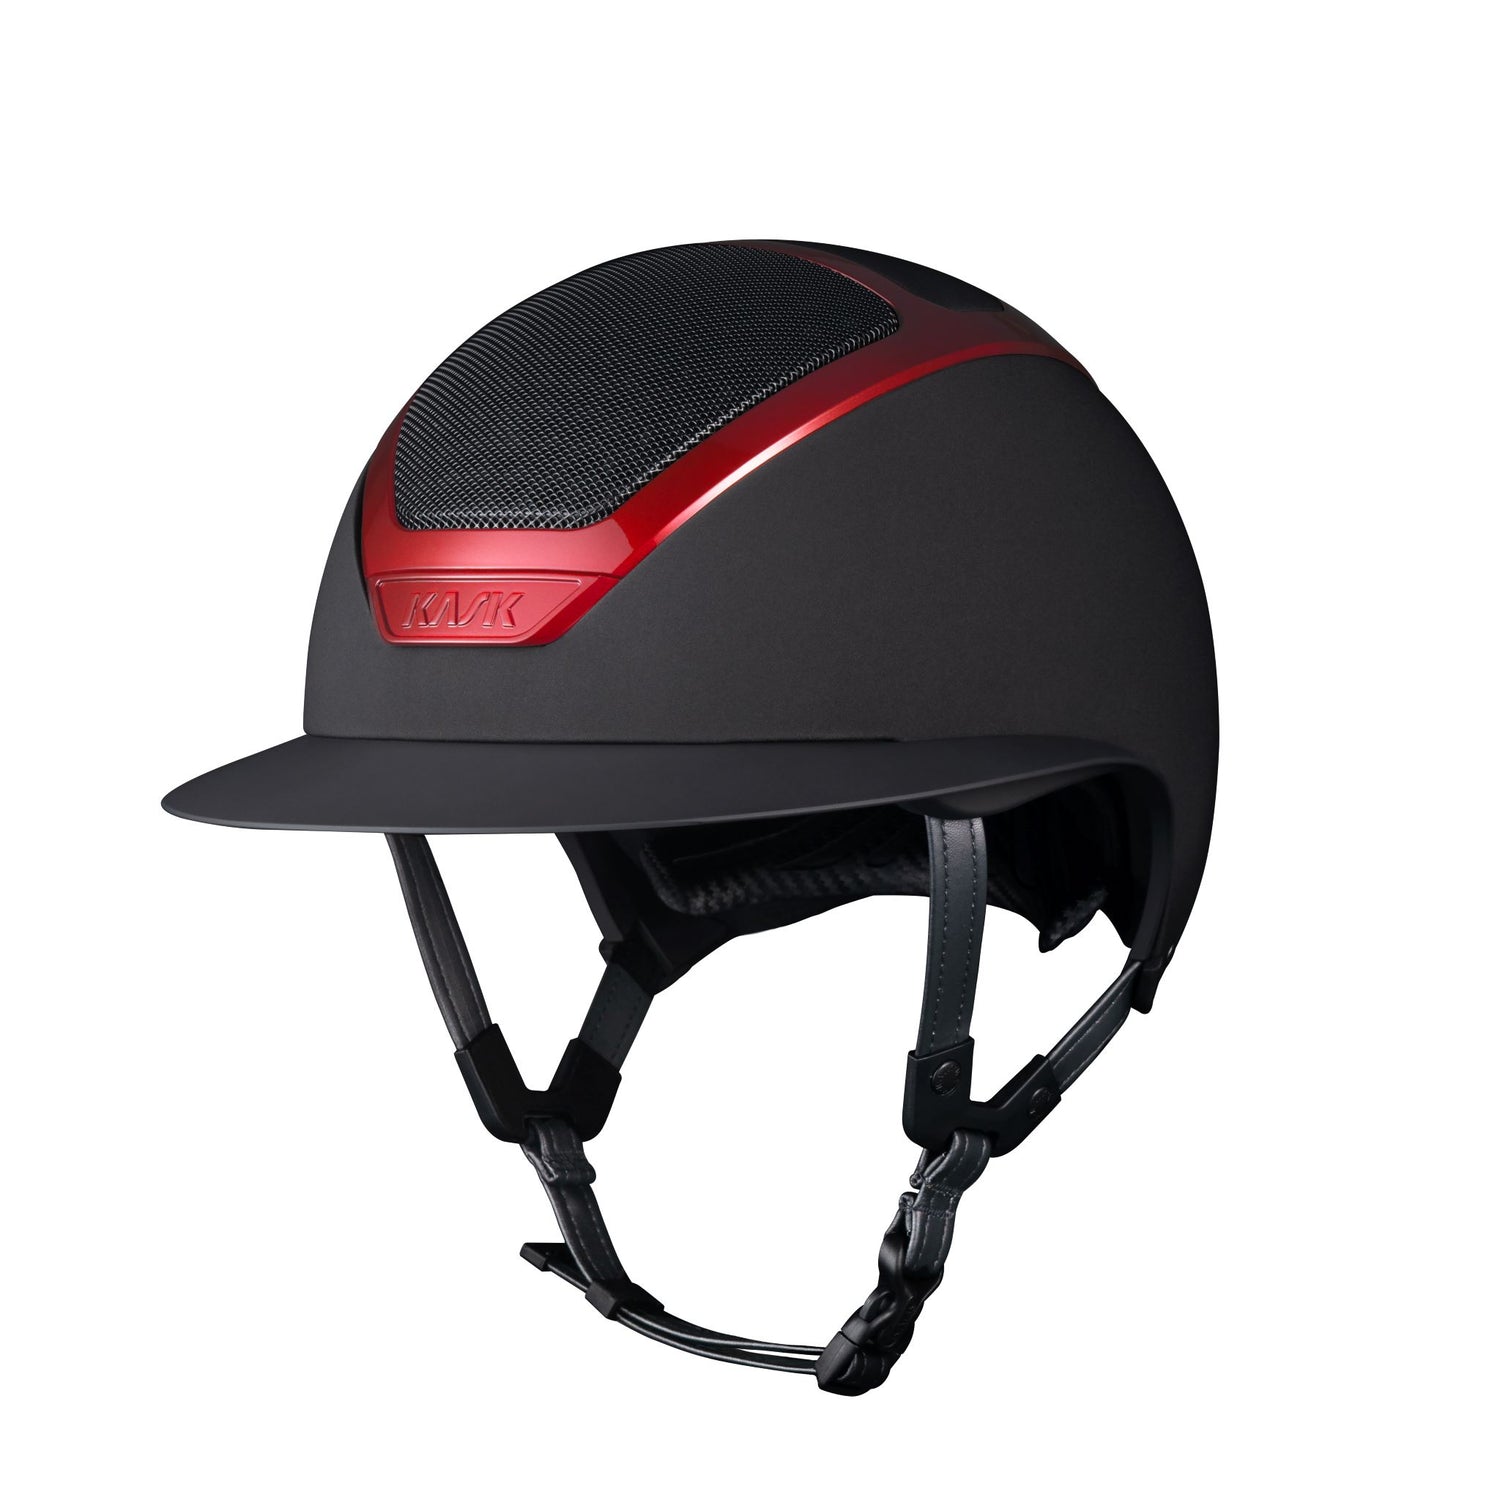 Horse riding helmet with red details